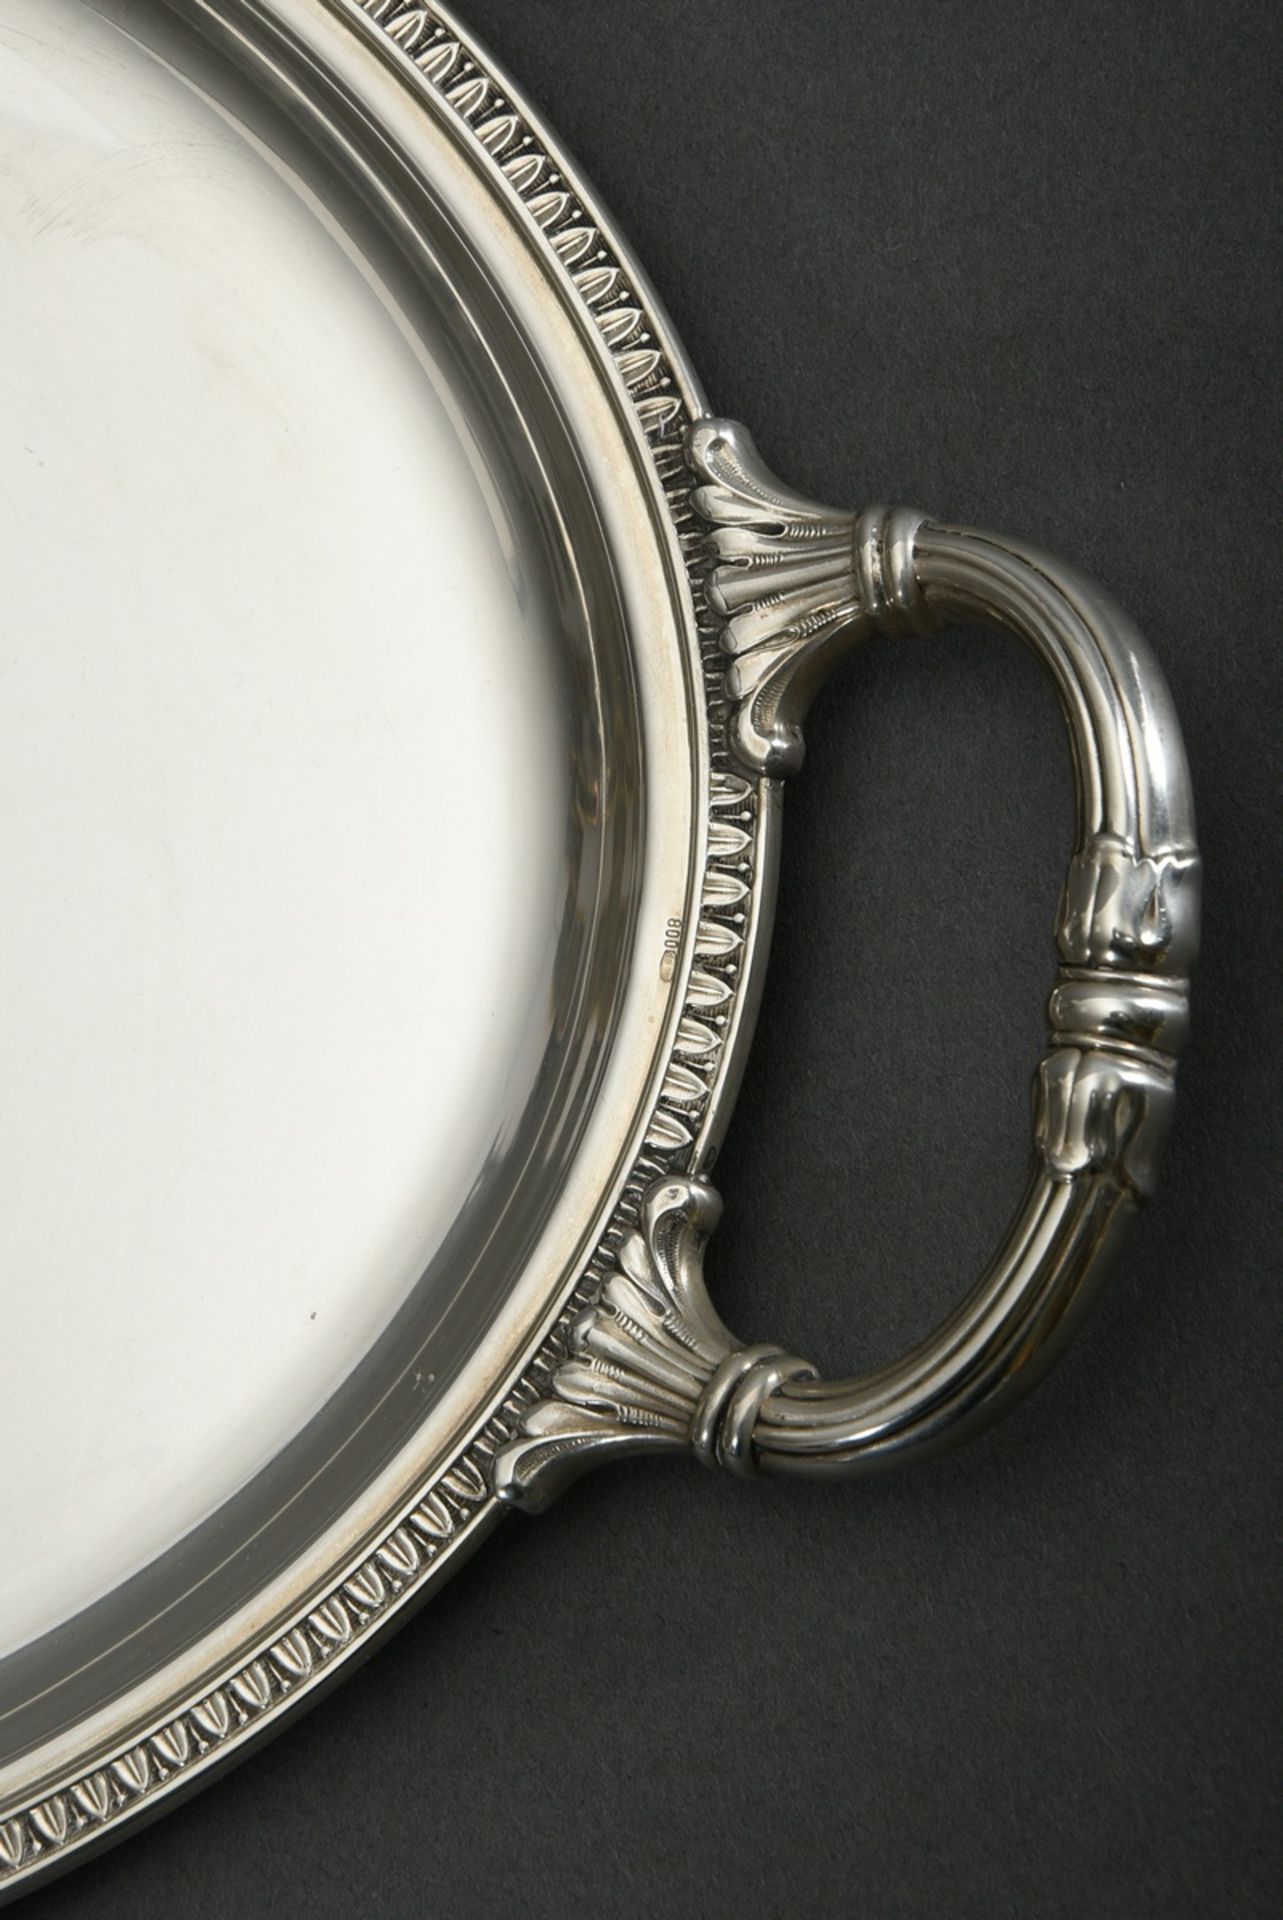 Oval tray in classical shape with relief rim and handles, silver 800, 525g, 41,6x24,6cm, slight sig - Image 2 of 3